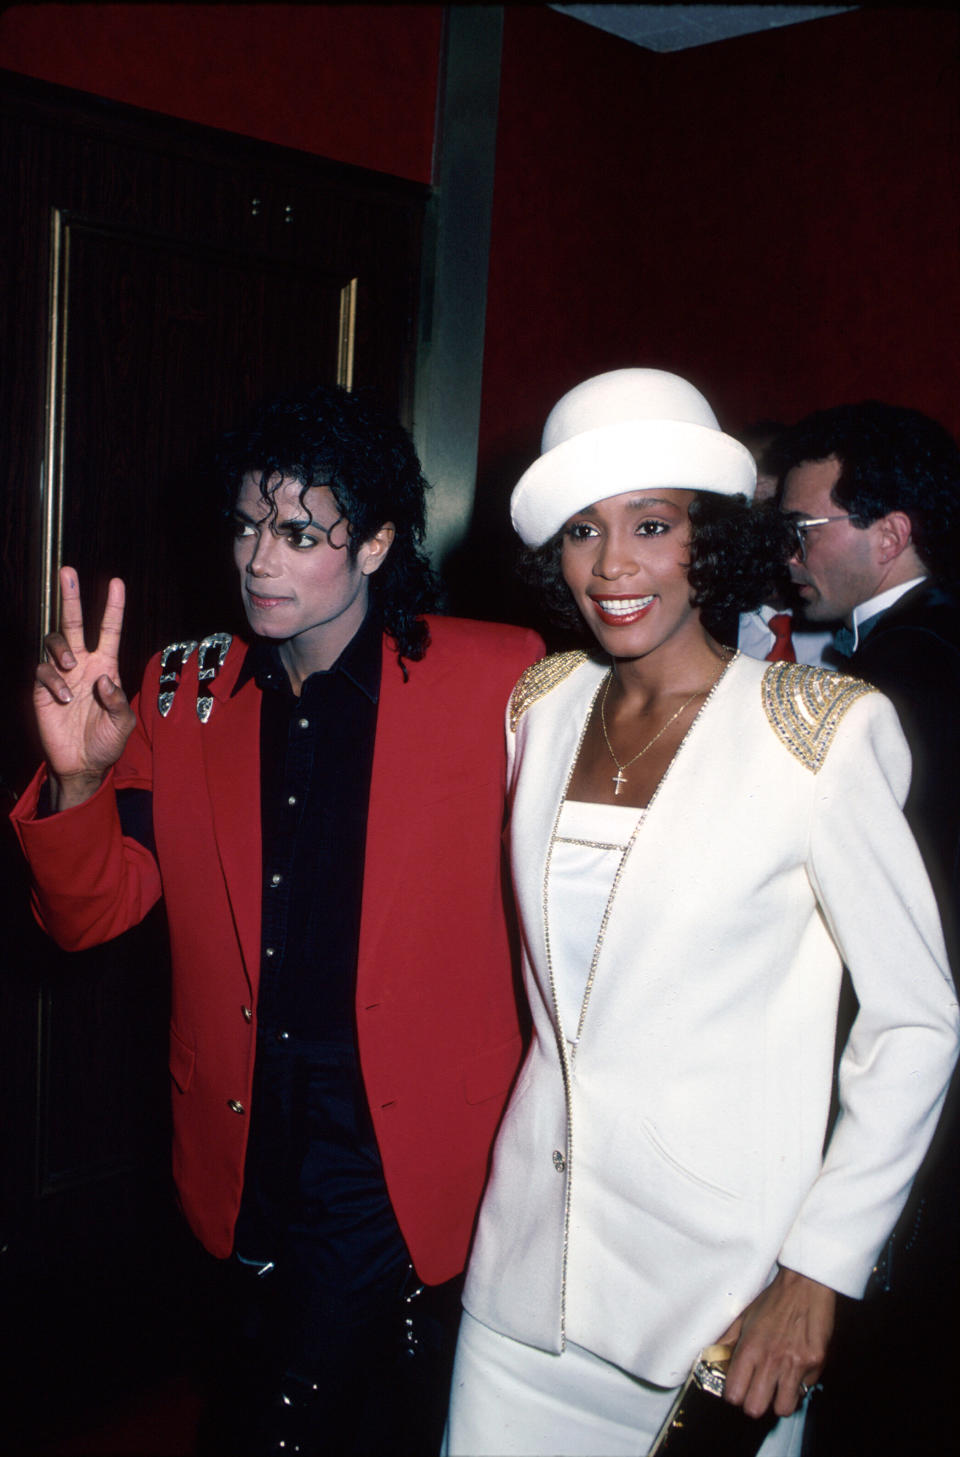 Singers Michael Jackson and Whitney Houston. (Photo: Time Life Pictures/DMI/The LIFE Picture Collection via Getty Images)